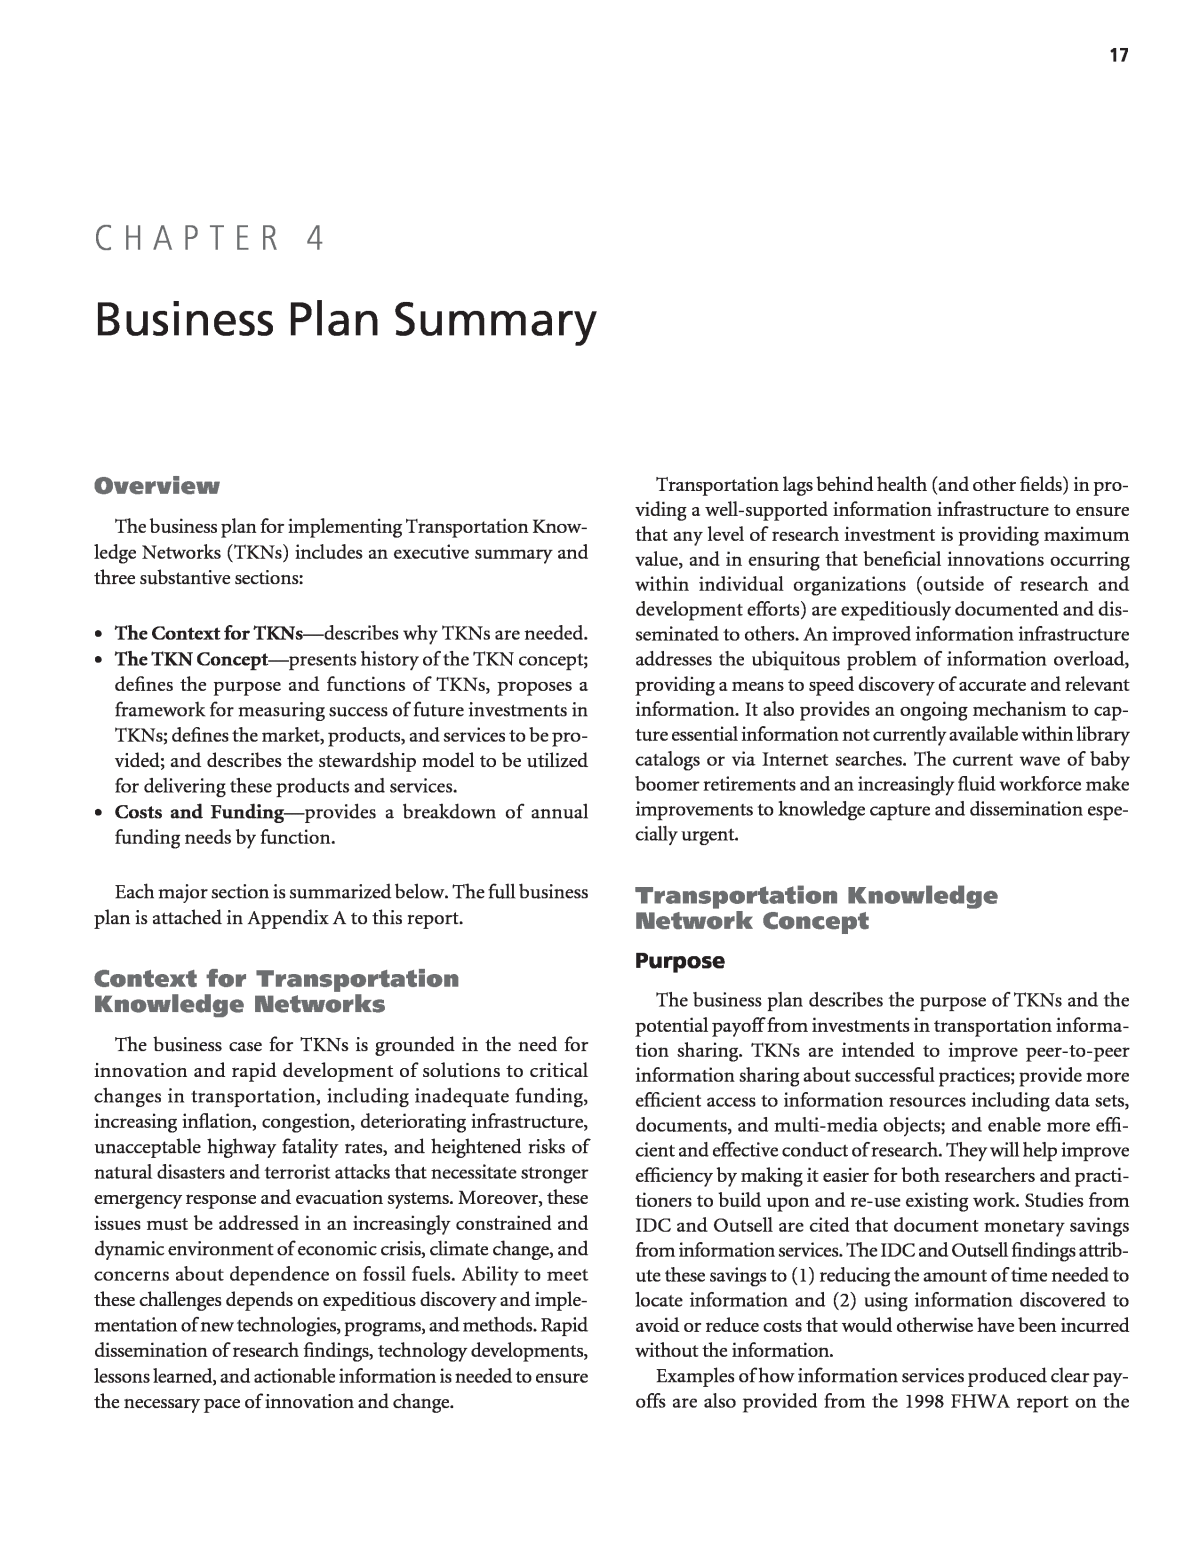 executive summary of business plan must